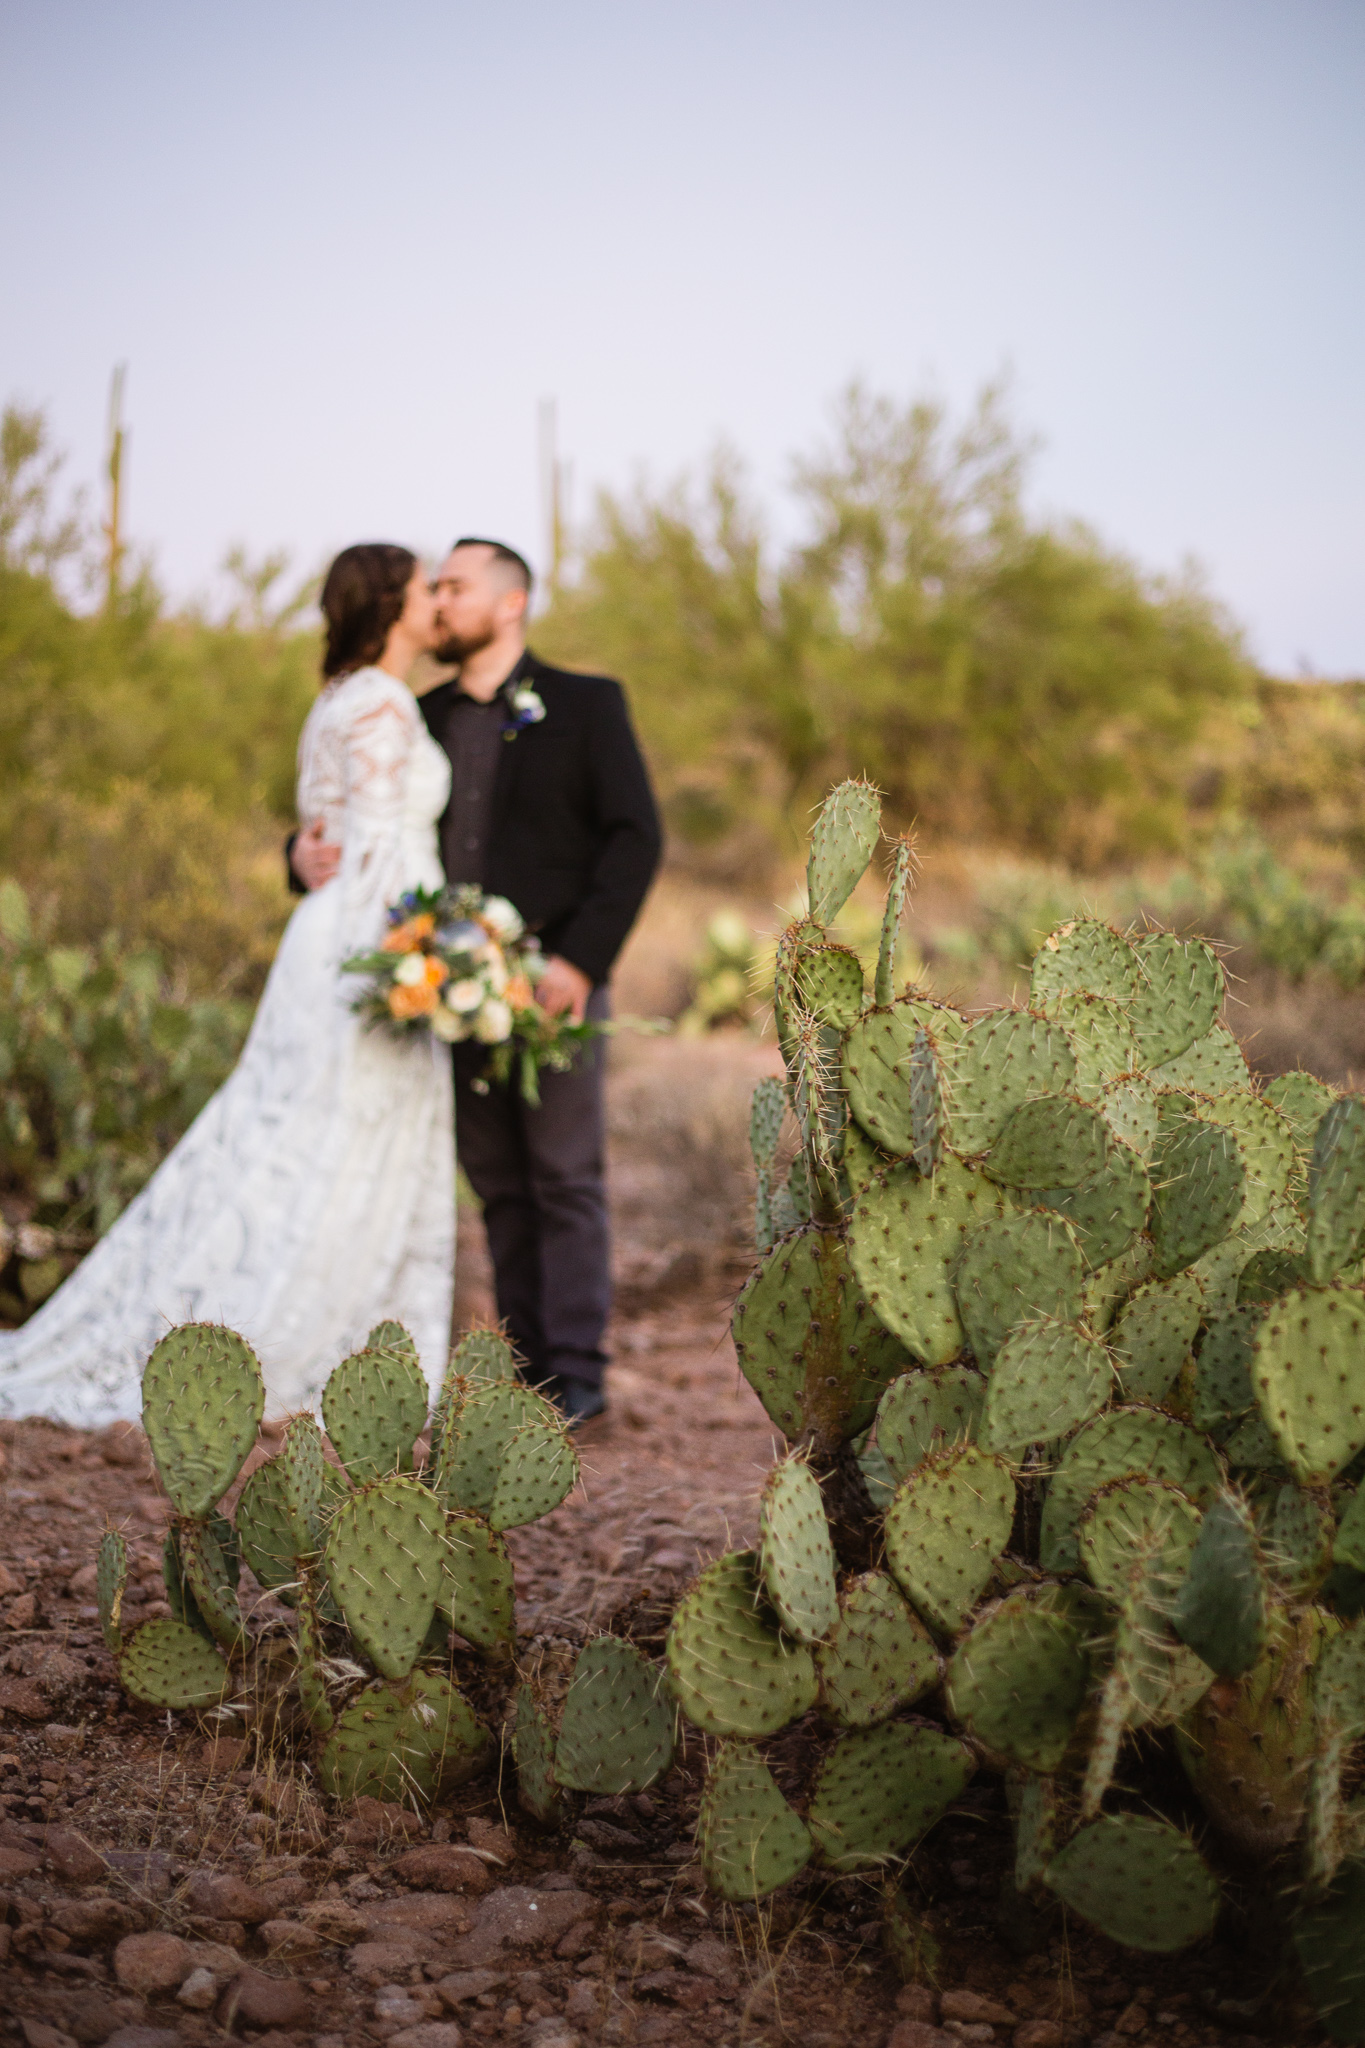 Witchy bohemian black white and gold inspired bride and groom at a Superstition Mountains styled wedding blurred in the background of an Arizona cactus.